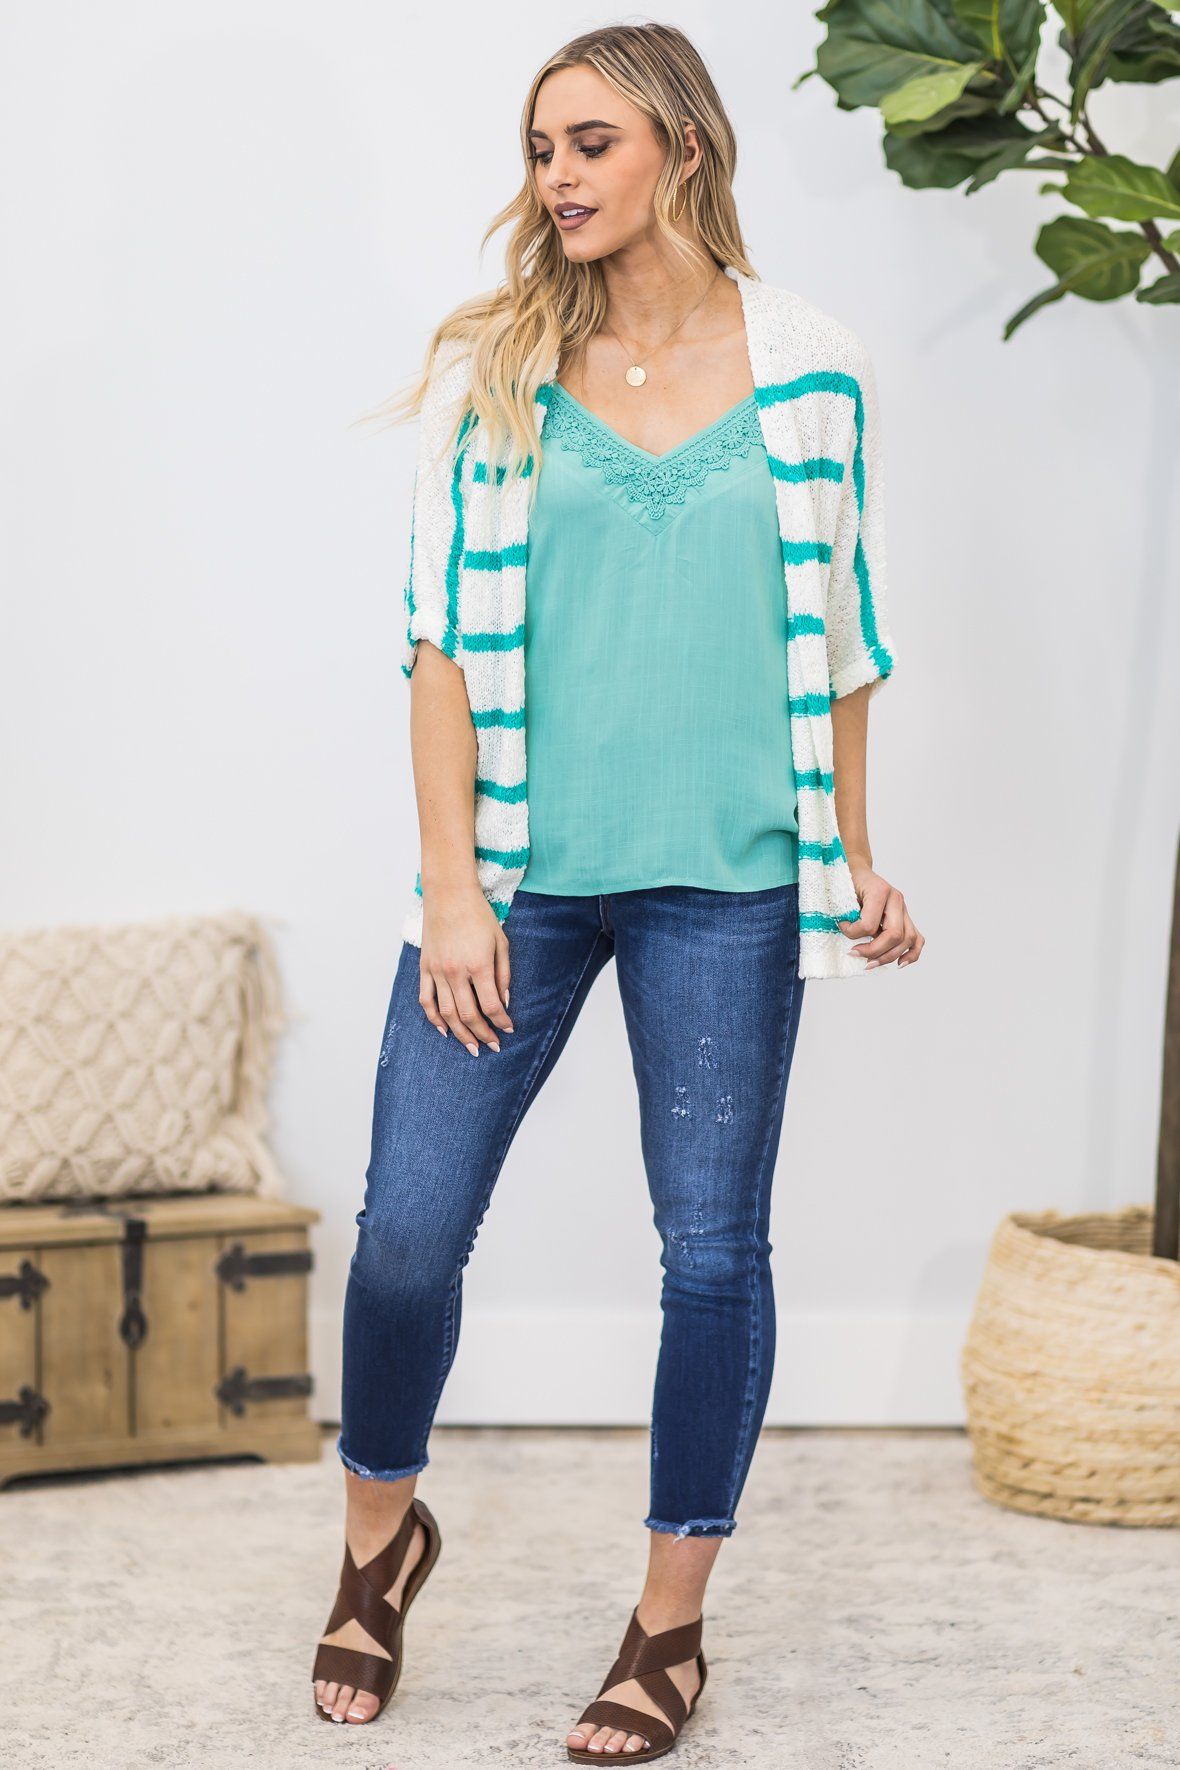 Ivory and Turquoise Striped Cardigan - Filly Flair